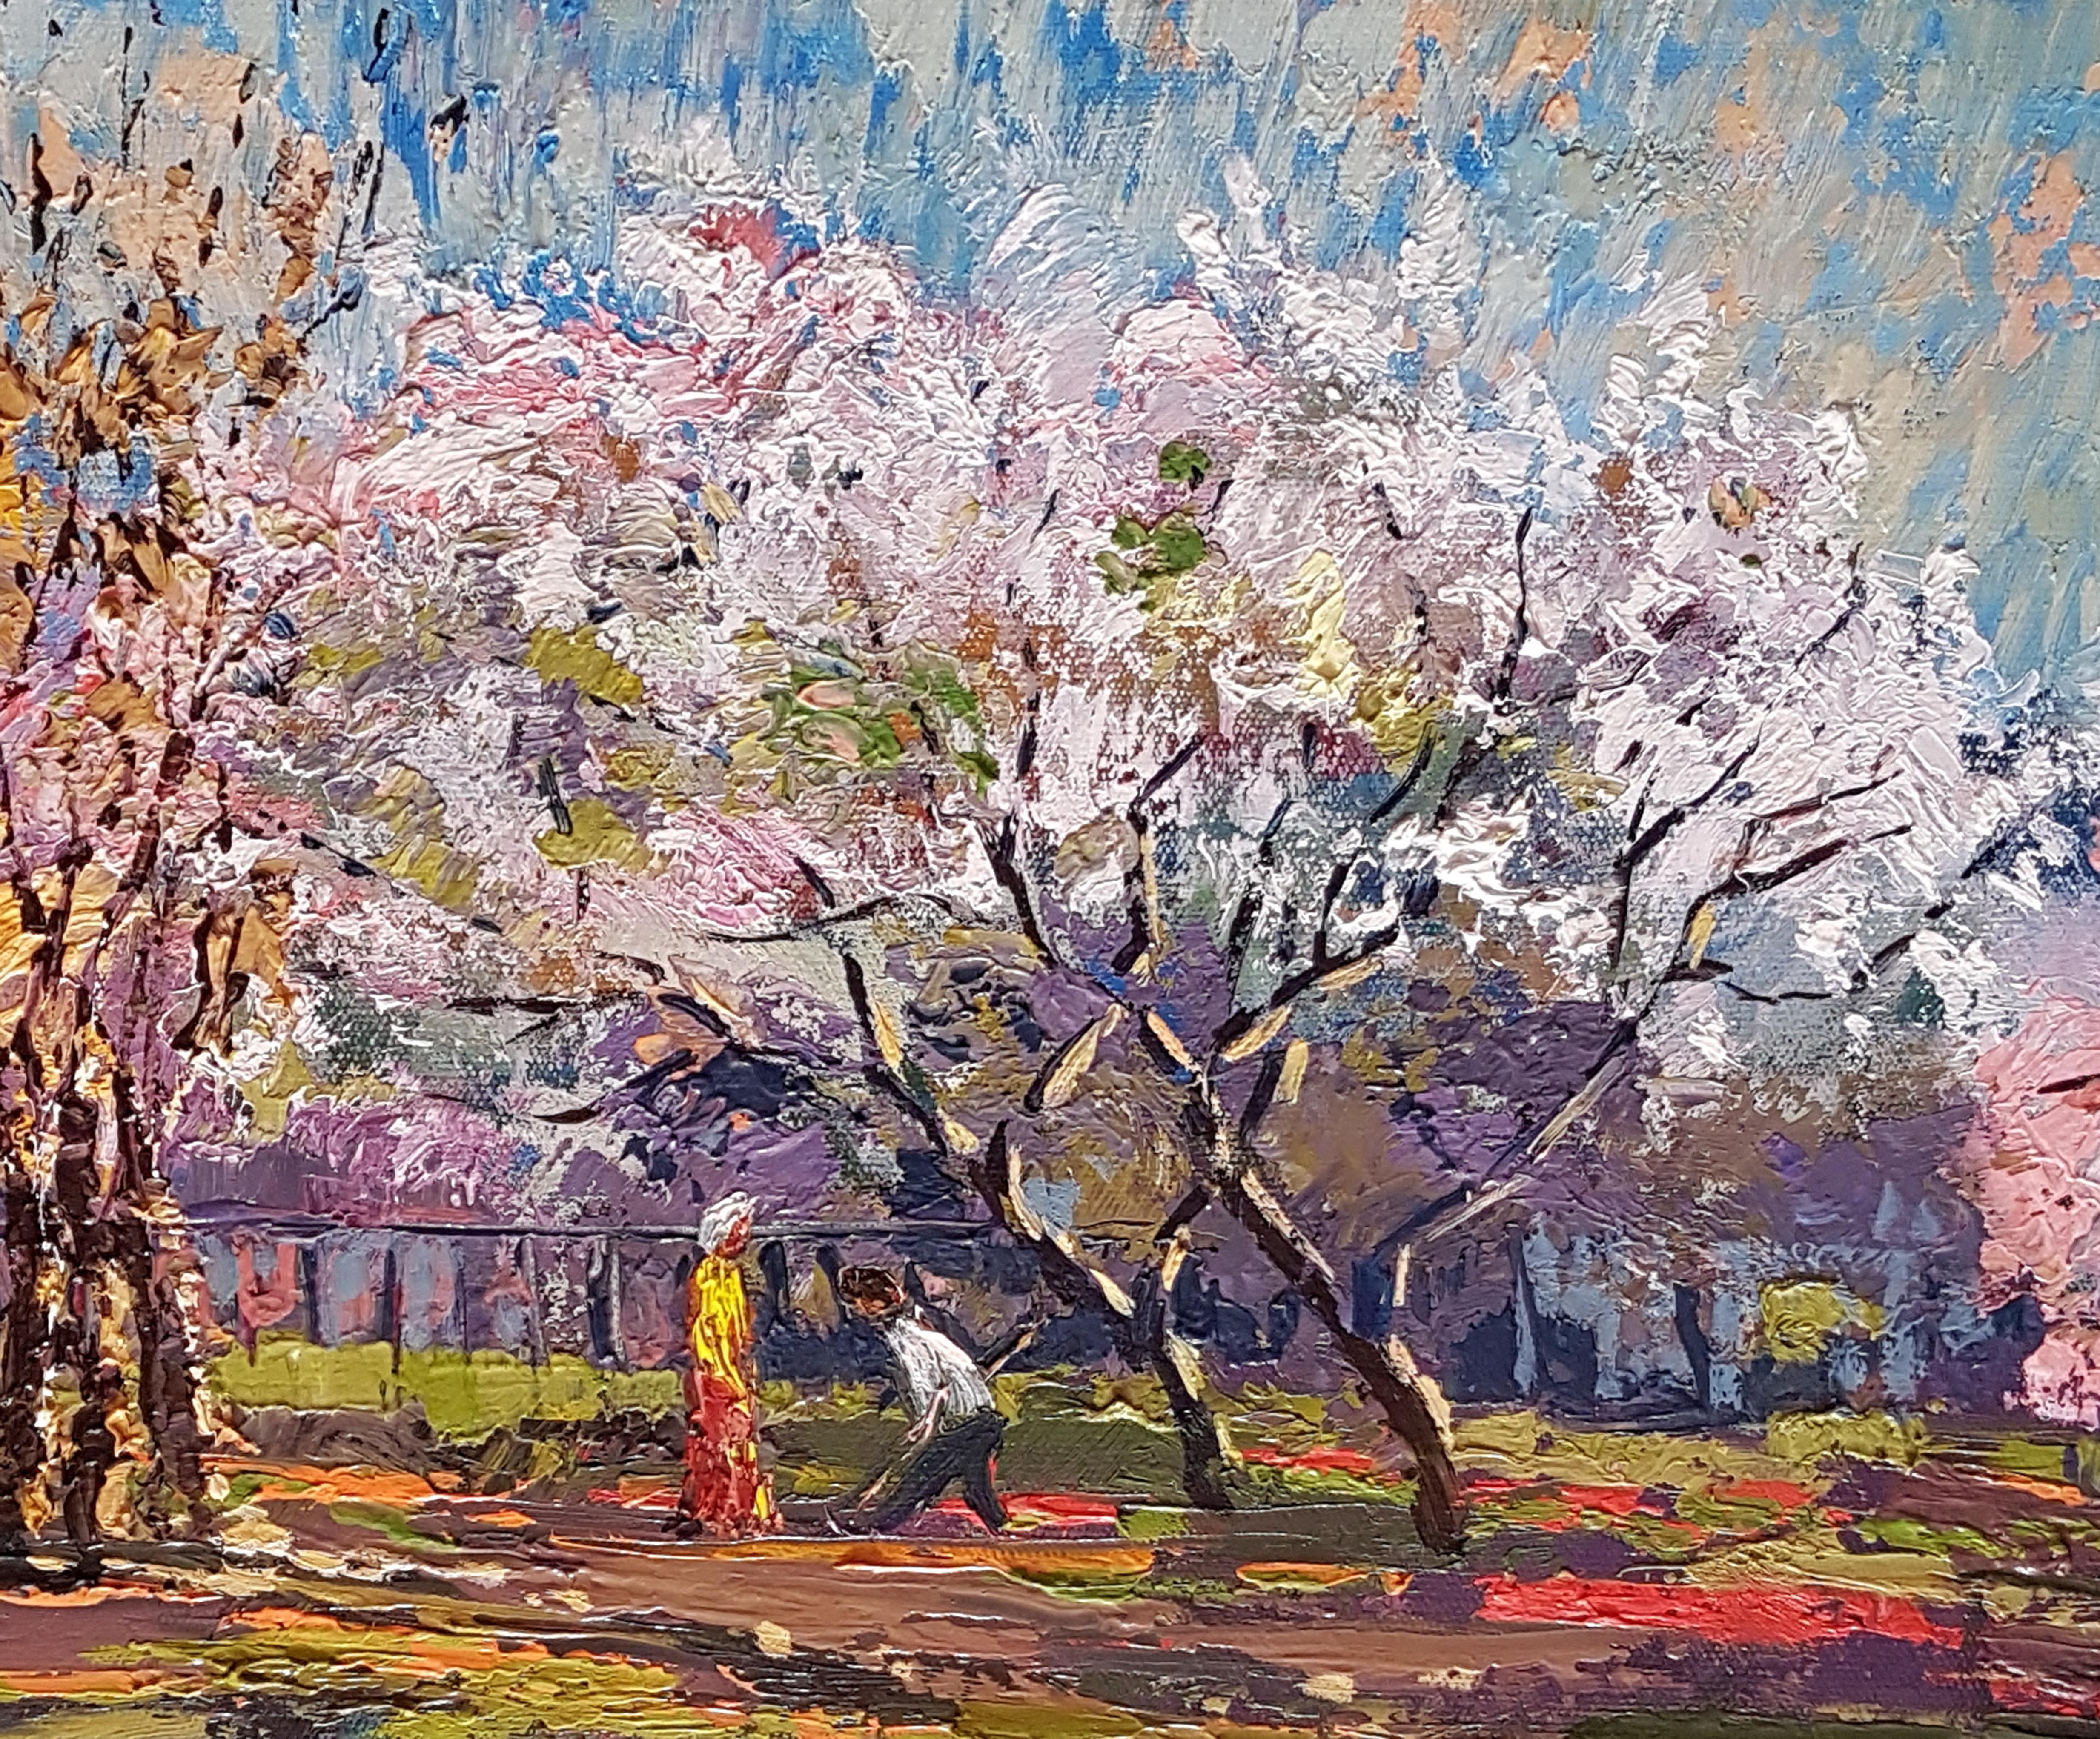 Artist: Ara H. Hakobyan
Work: Original Oil Painting, Handmade Artwork, One of a Kind
Medium: Oil on Canvas
Year: 2017
Style: Impressionism
Subject: In the Garden
Size: 22